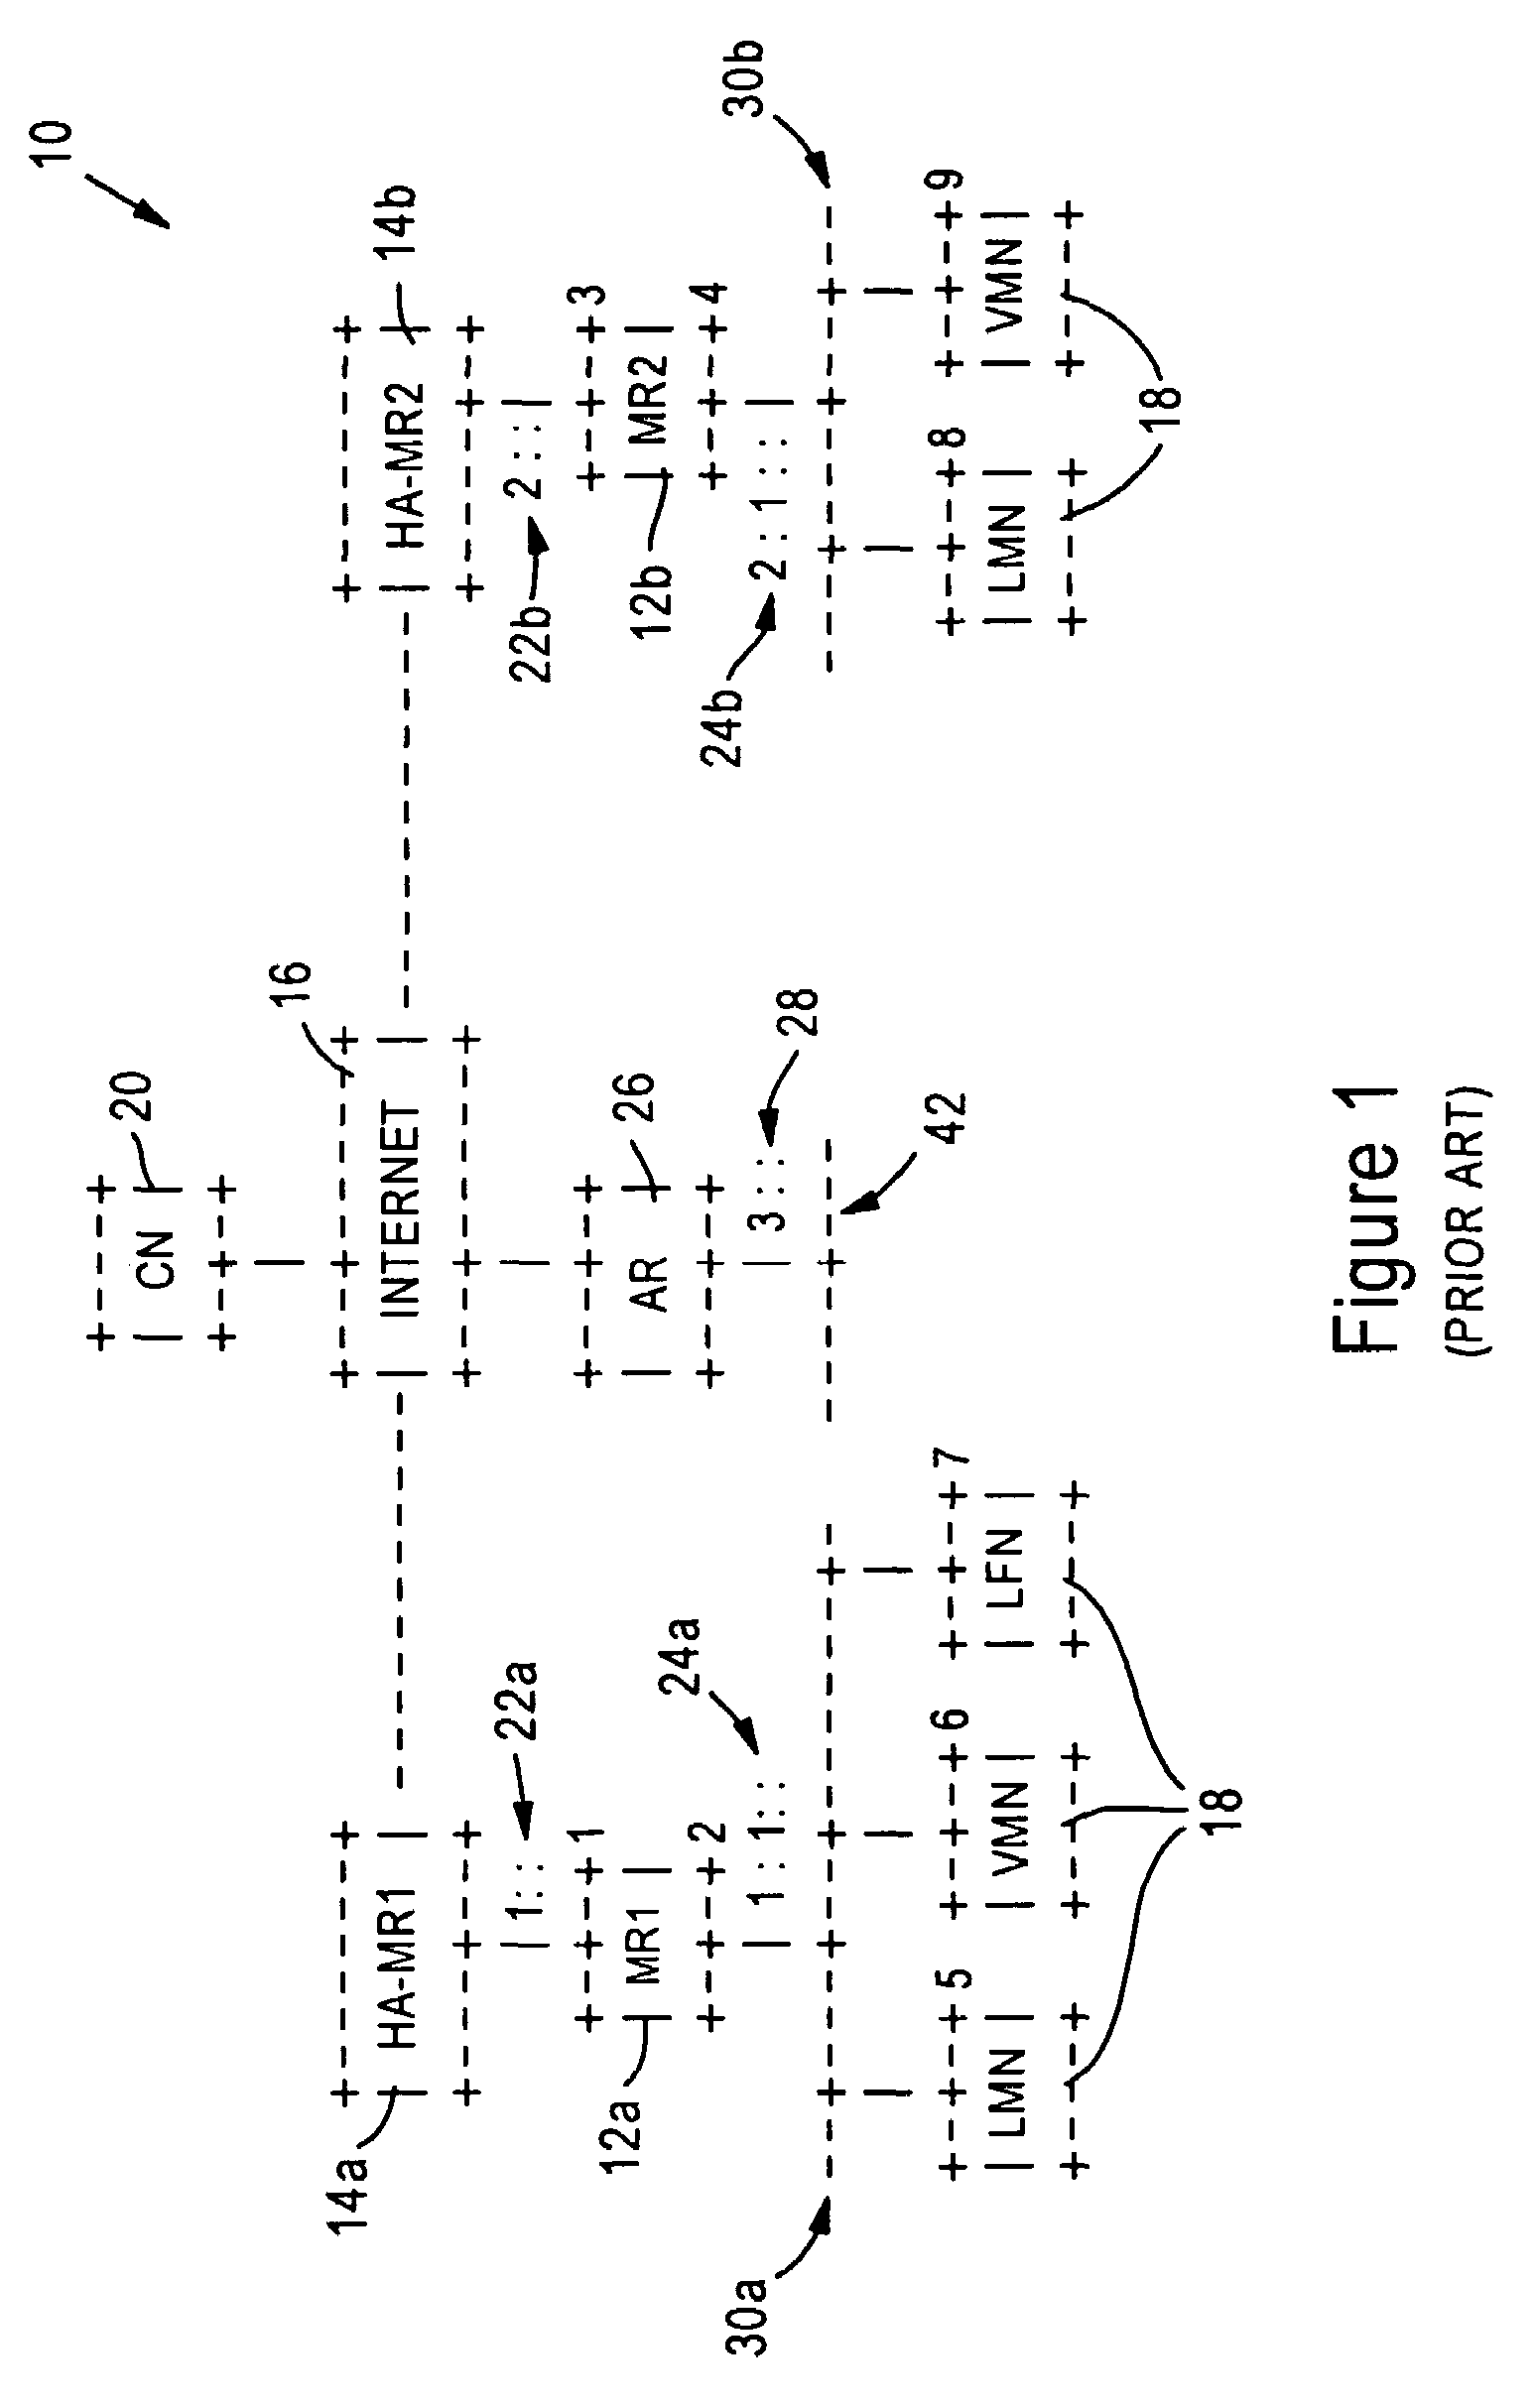 Arrangement in an access router for optimizing mobile router connections based on delegated network prefixes